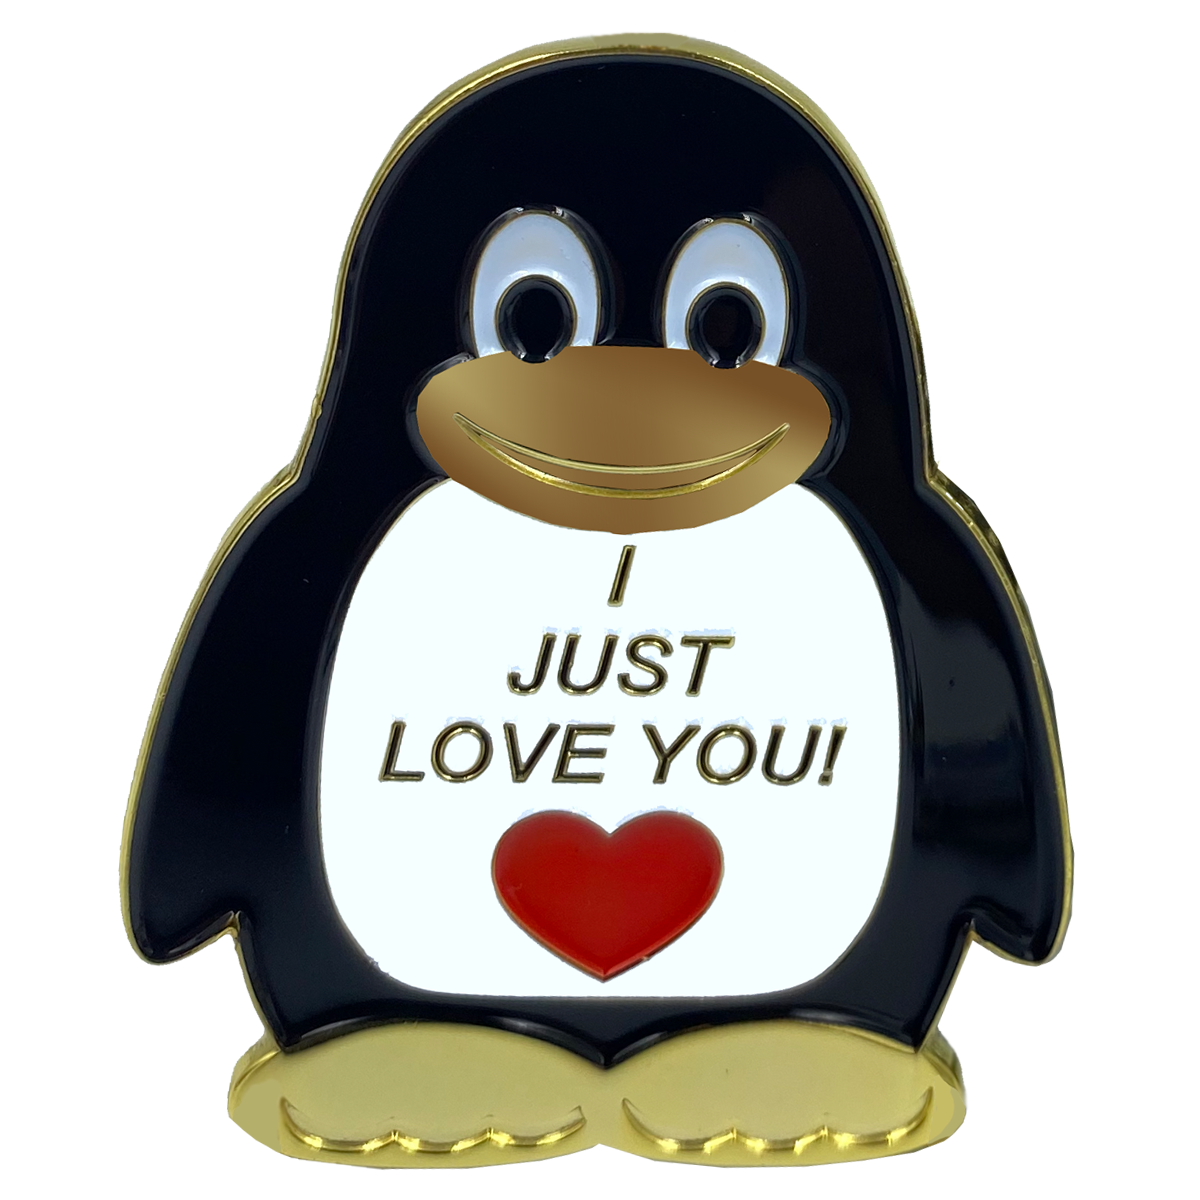 CL2-08 Penguin "I Just Love You" pin with dual pin posts and deluxe safety locking clasps